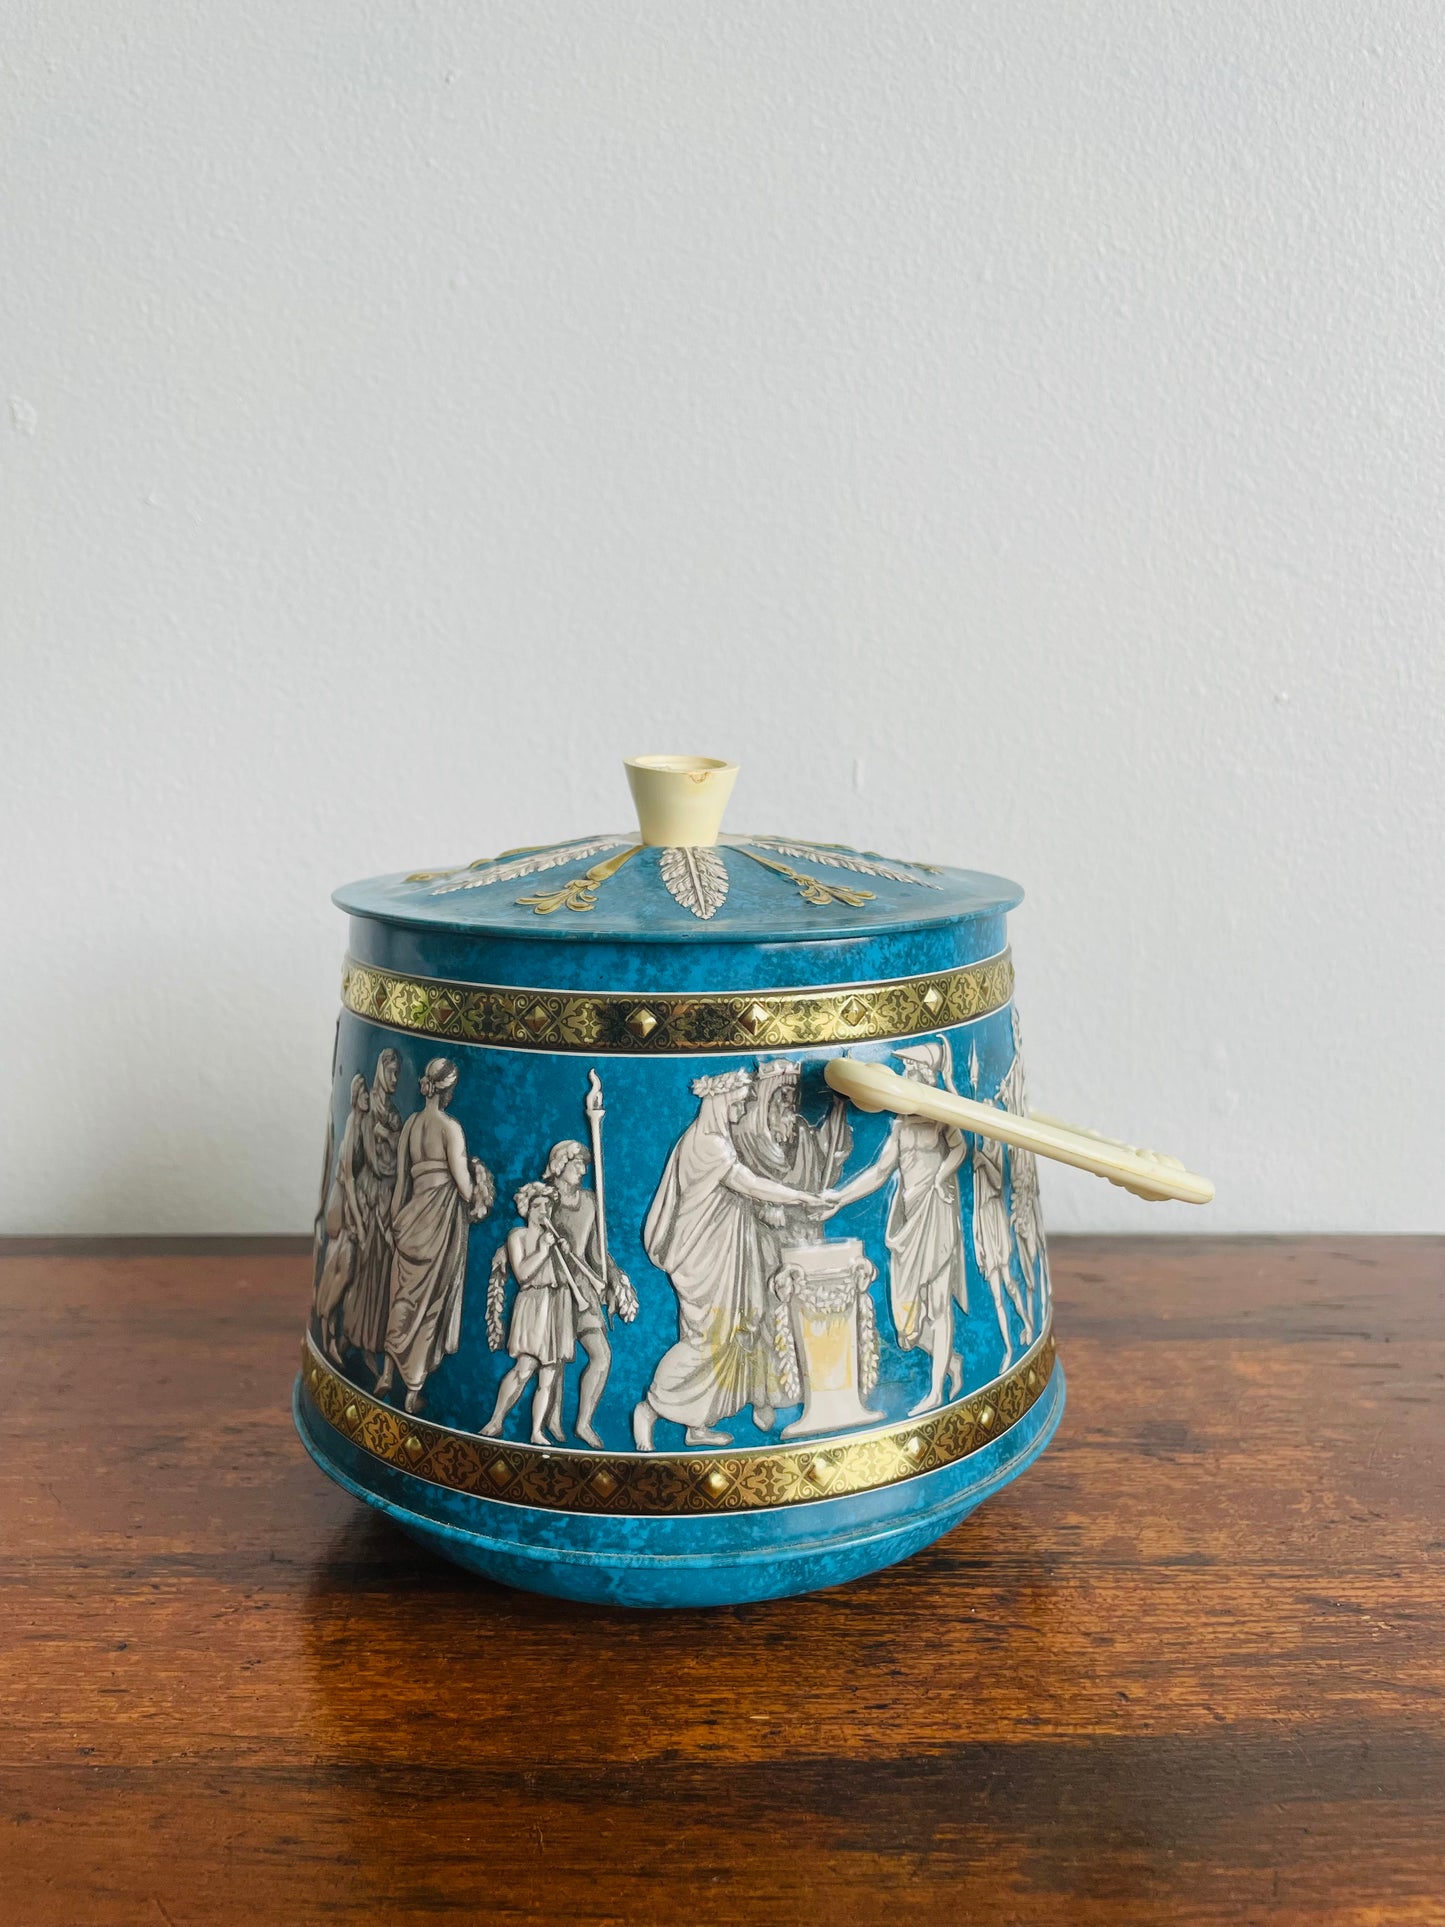 Vintage Blue Tin with Lid & Handle in a Grecian Design - Great Storage for Tea!